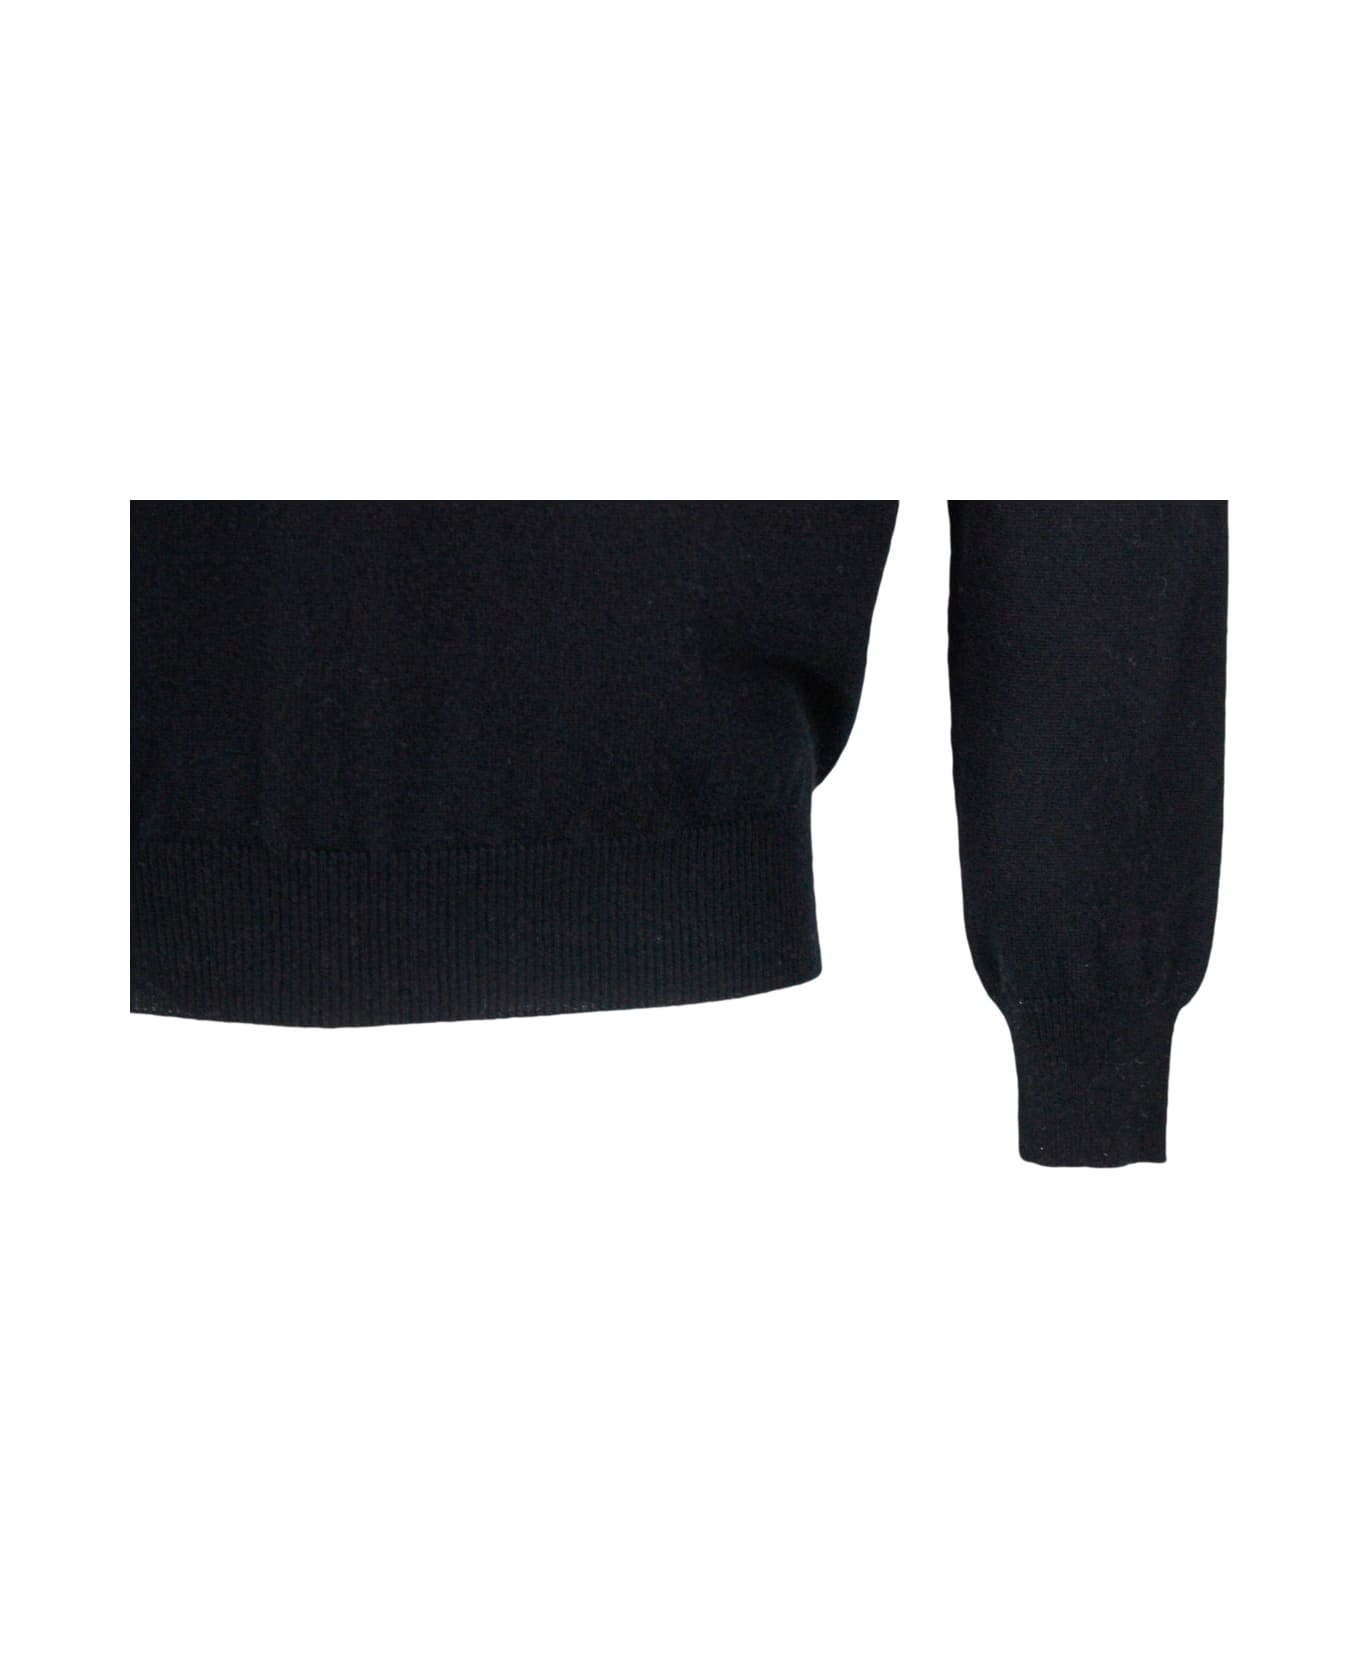 Colombo Long-sleeved Crewneck Sweater In Fine 2-ply 100% Kid Cashmere With Special Processing On The Edge Of The Neck - Black